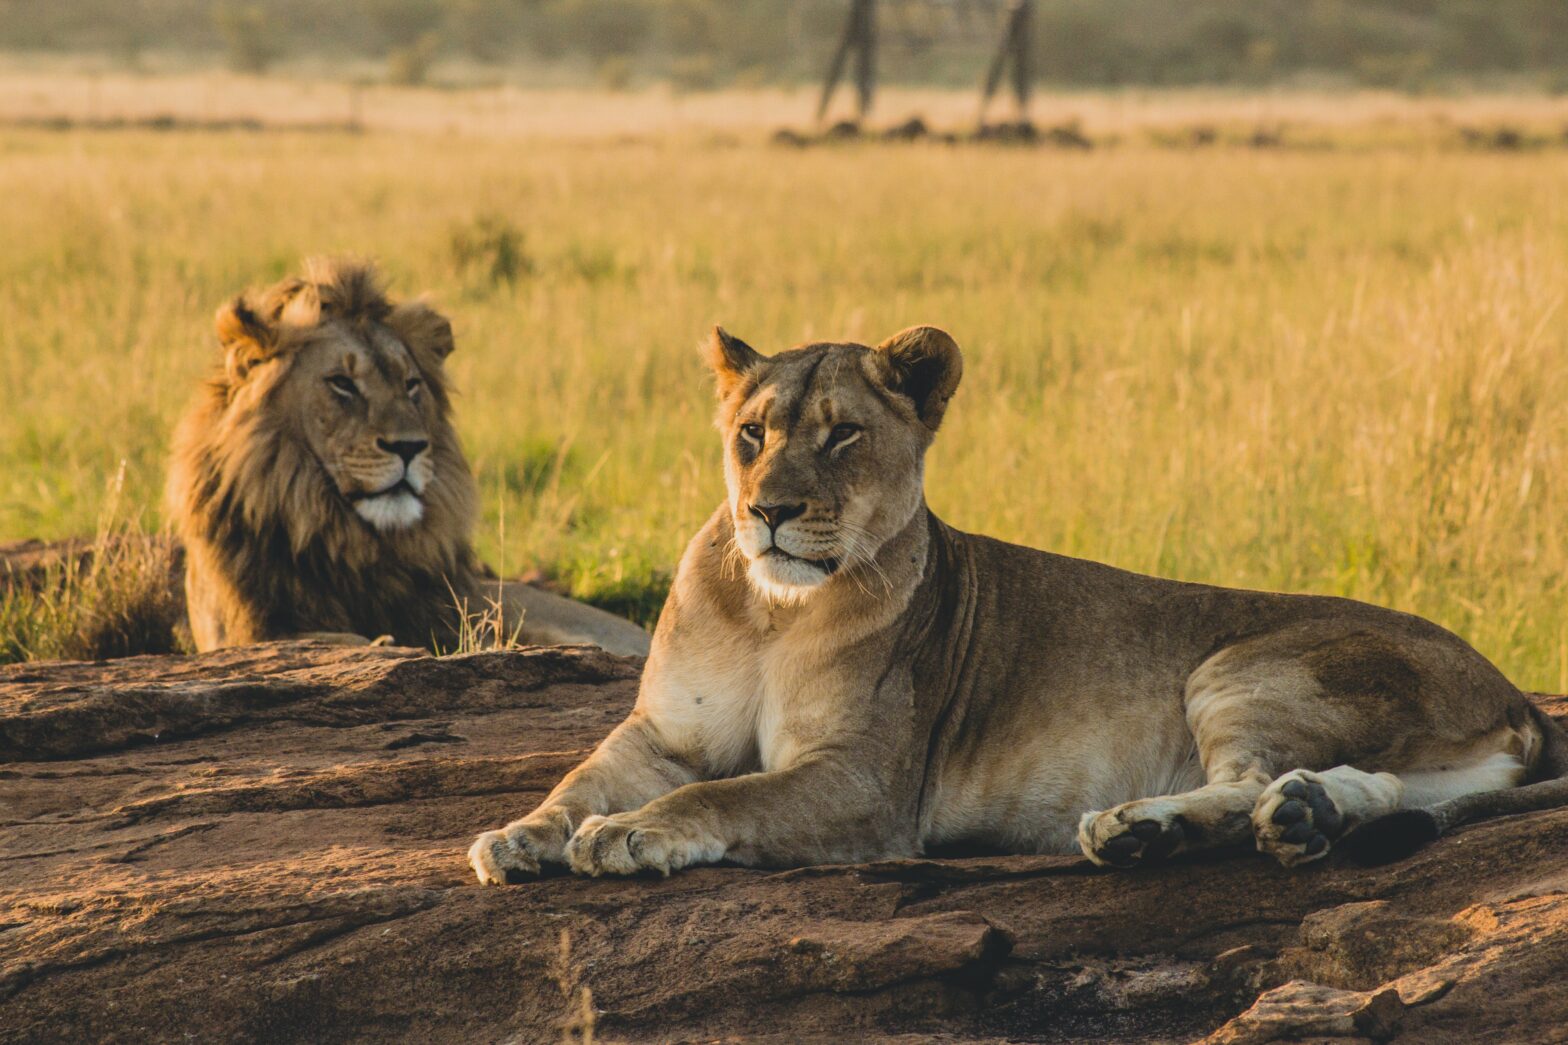 Planning an African Safari? Here's Where You Can Spot the Big 5